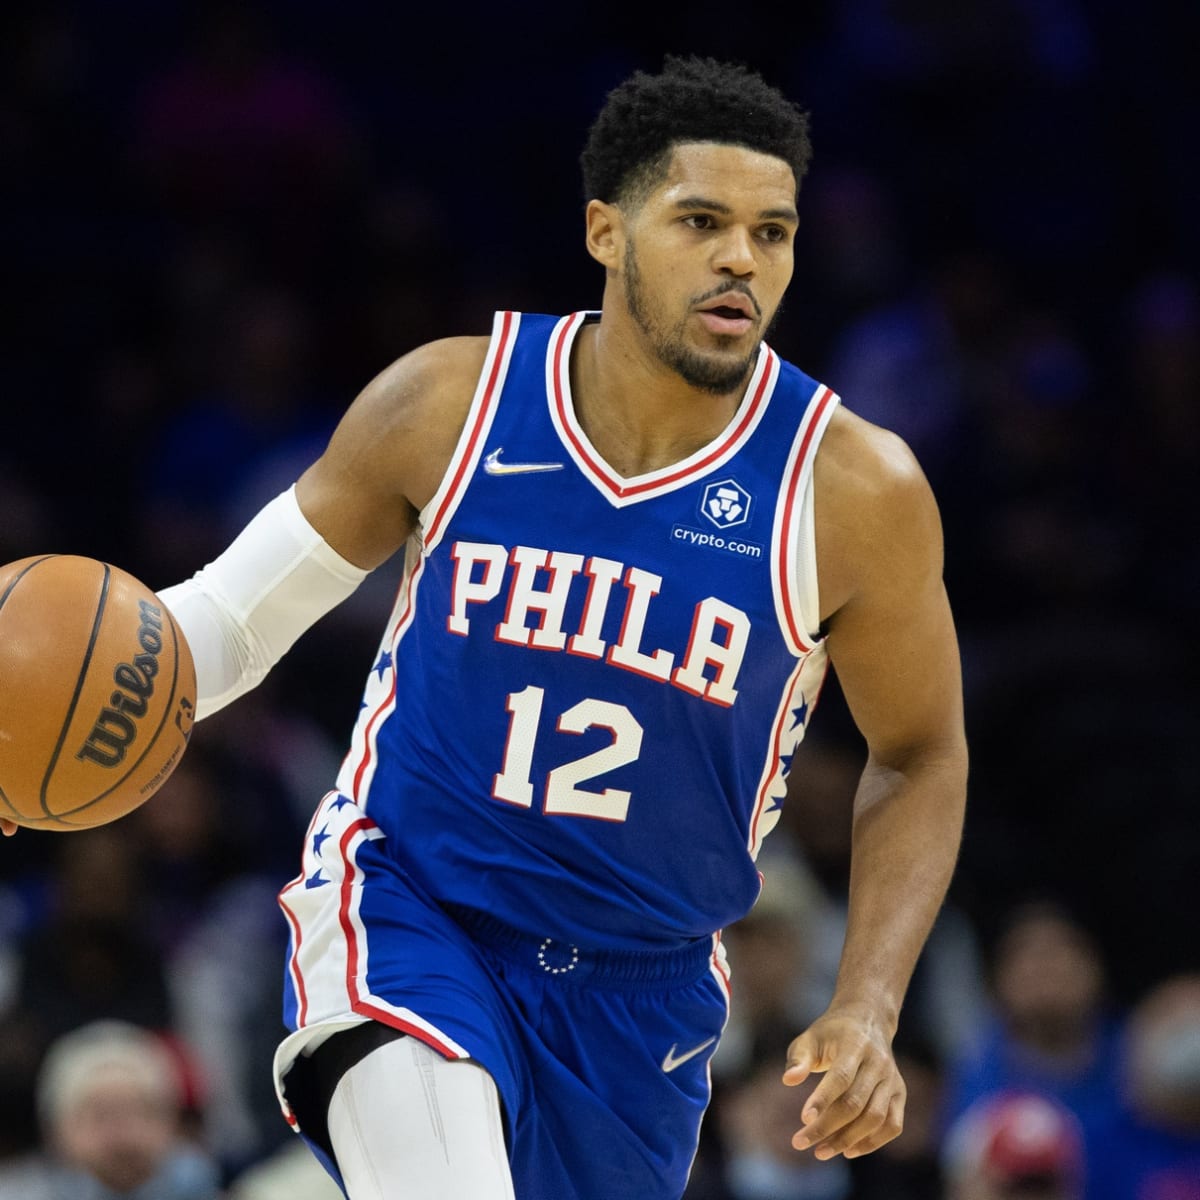 Tobias Harris if DPP (dollars per point) was a stat : r/sixers